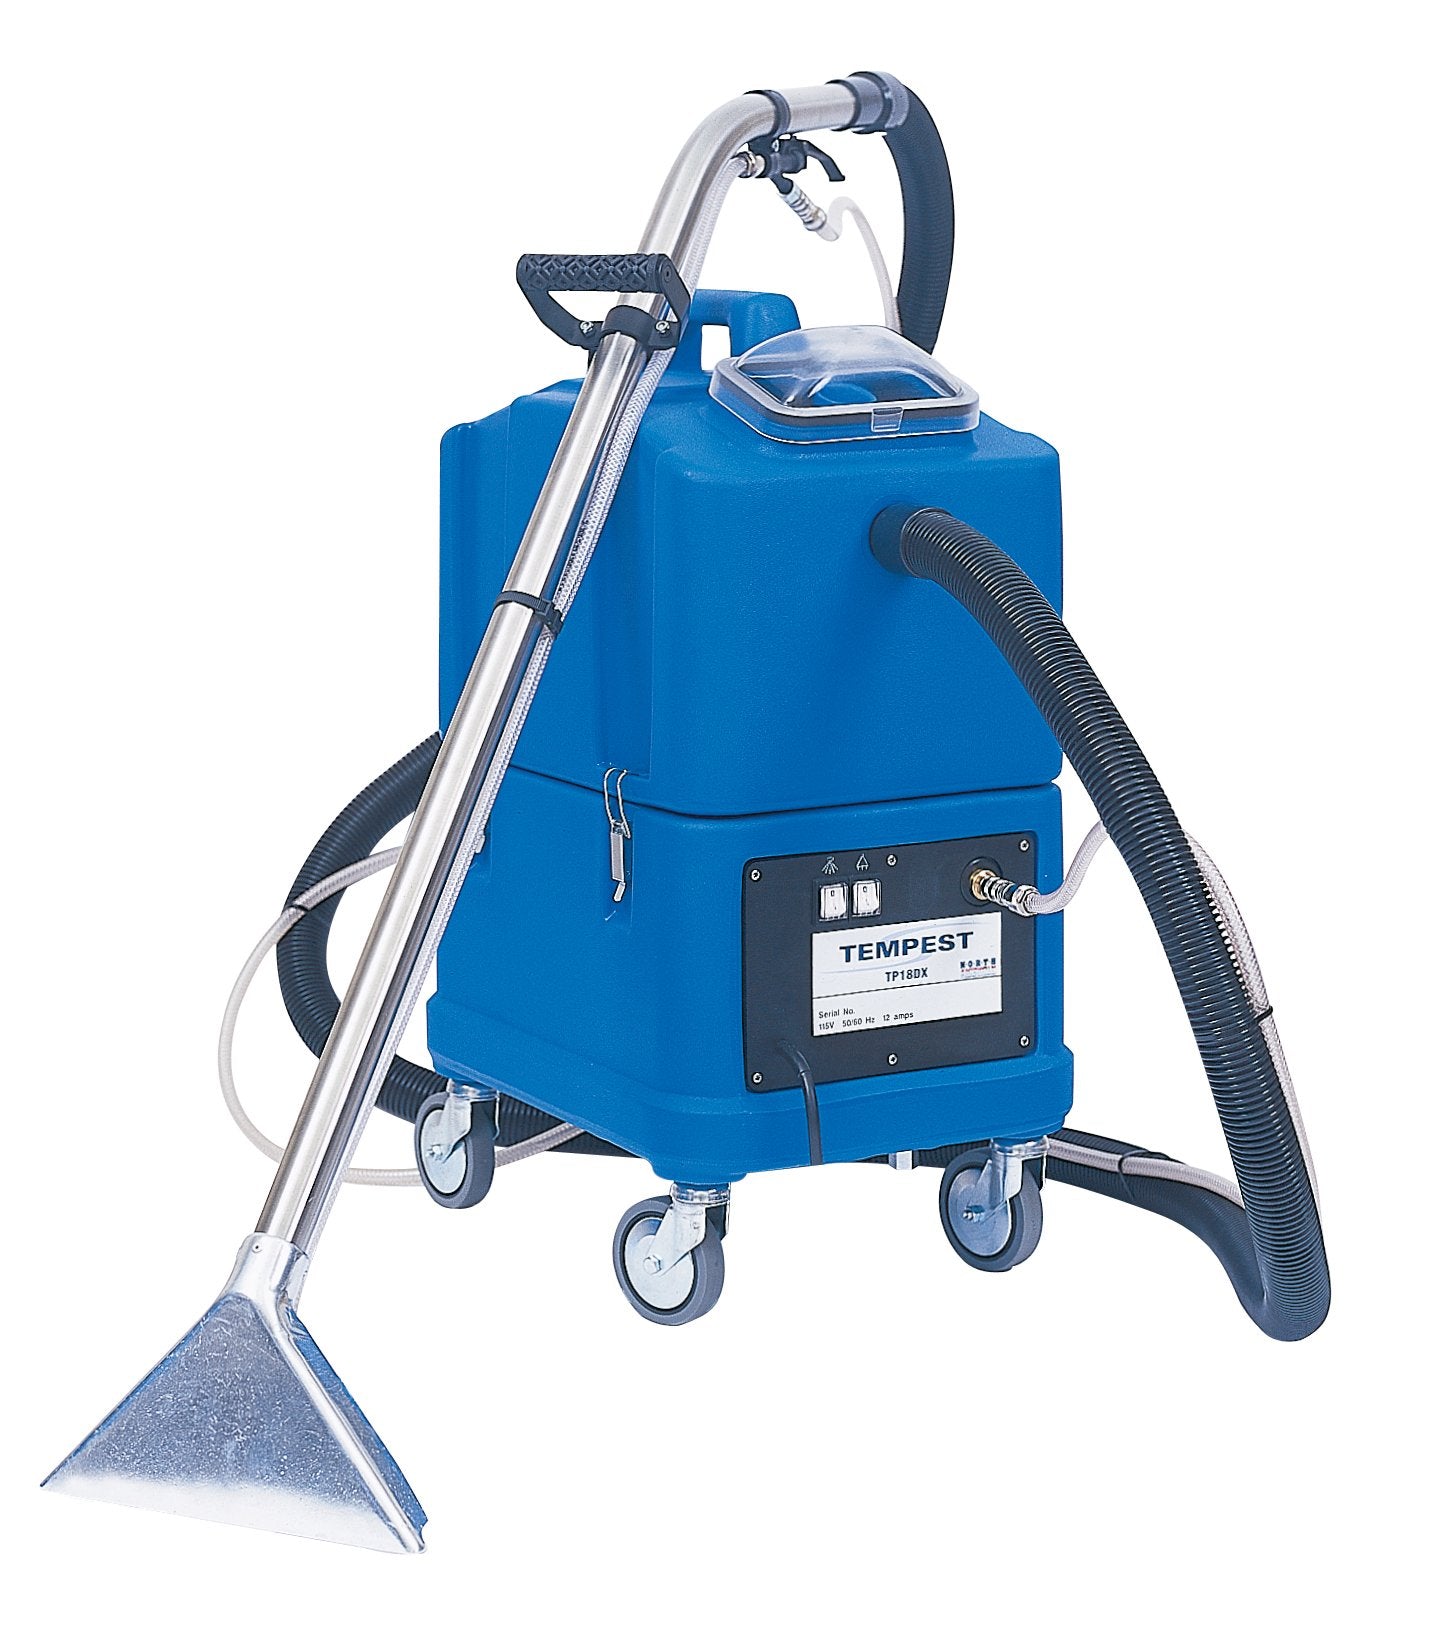 NaceCare TP8X Polyethylene Box Extractor with 3 Jet Stainless Steel Wand, 8 Gallon Capacity, 2HP, 33' Power Cord Length, Blue